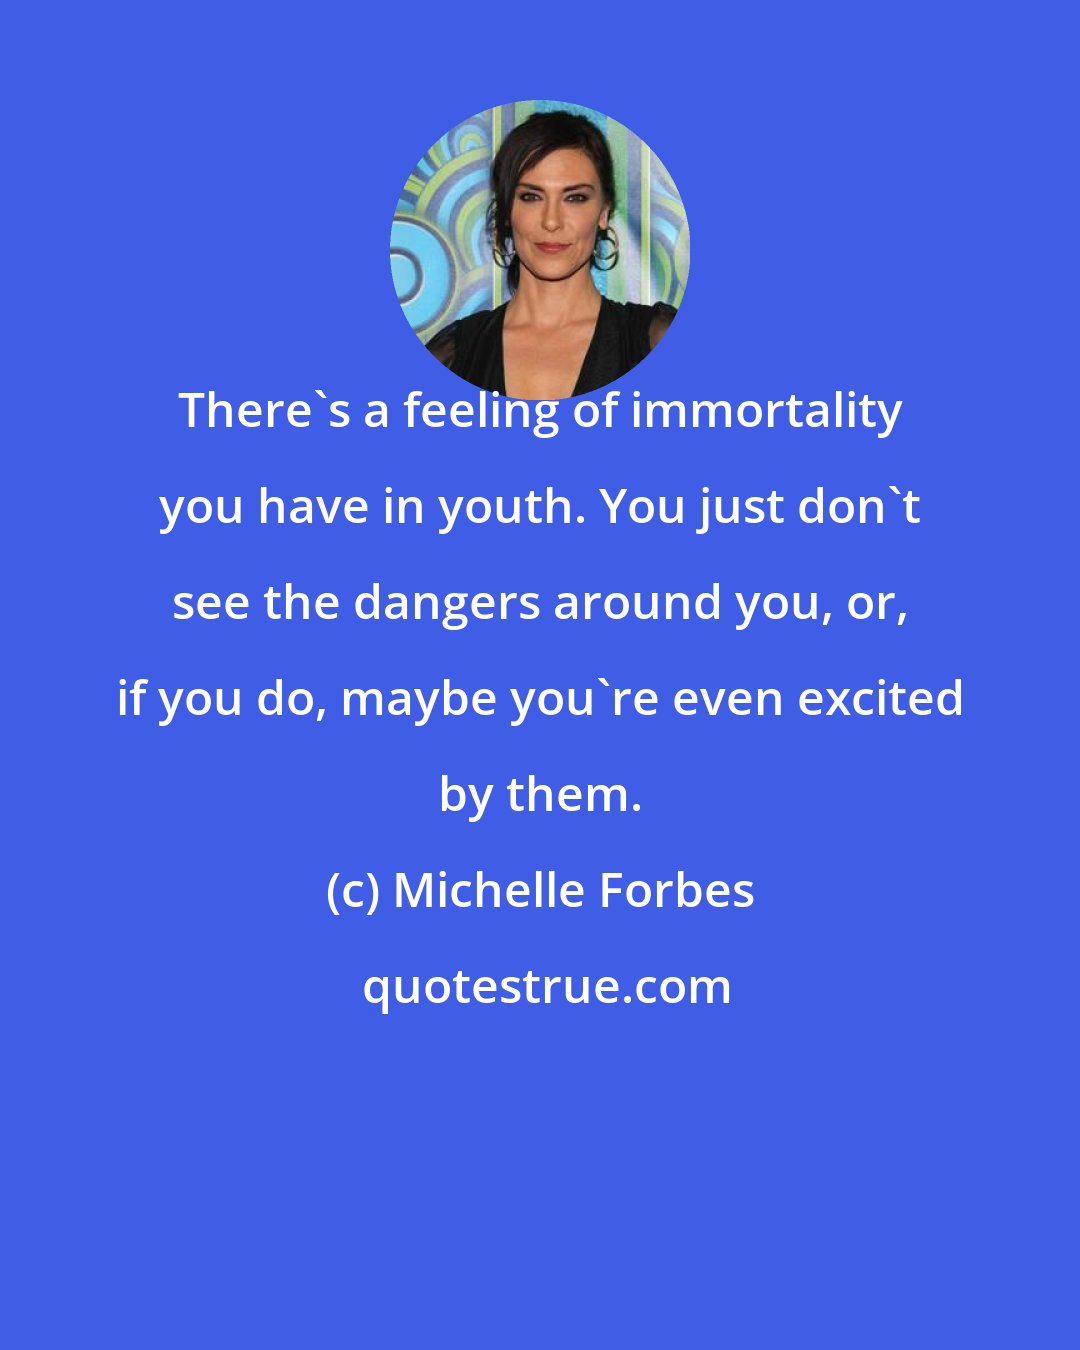 Michelle Forbes: There's a feeling of immortality you have in youth. You just don't see the dangers around you, or, if you do, maybe you're even excited by them.